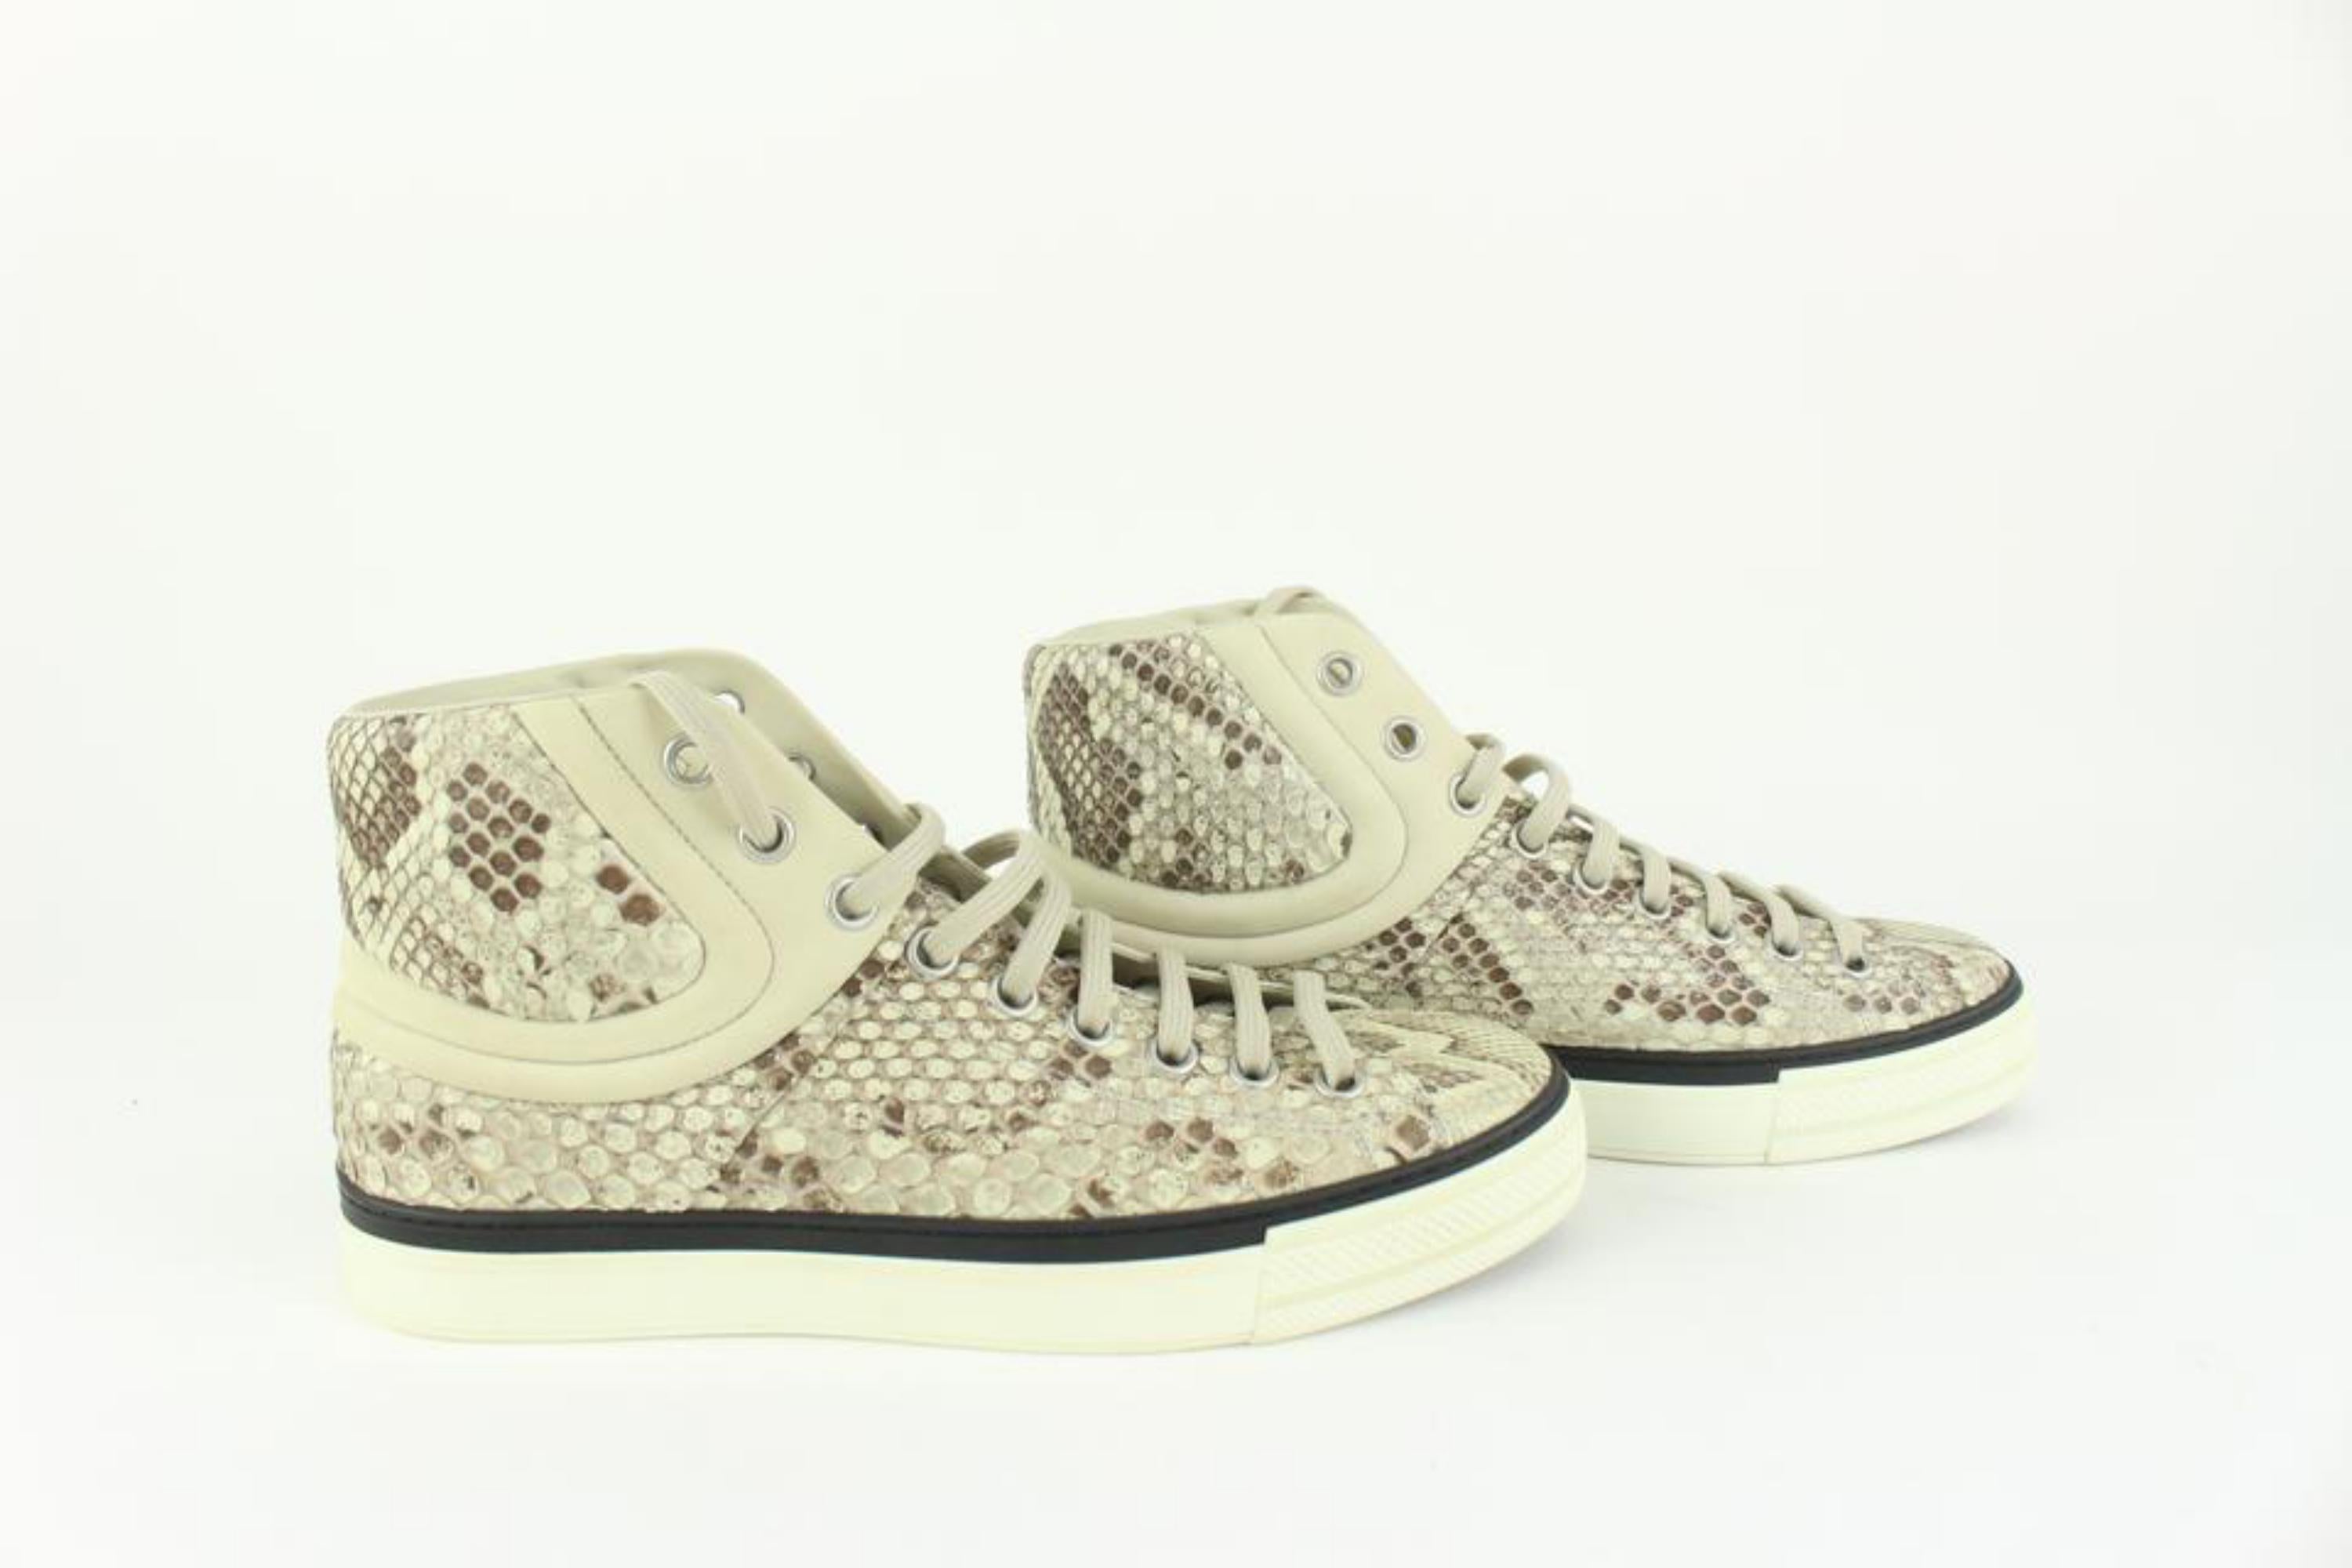 Louis Vuitton Men's 8 US Python Ivory Cream High Top Sneaker 1213lv15 In New Condition For Sale In Dix hills, NY